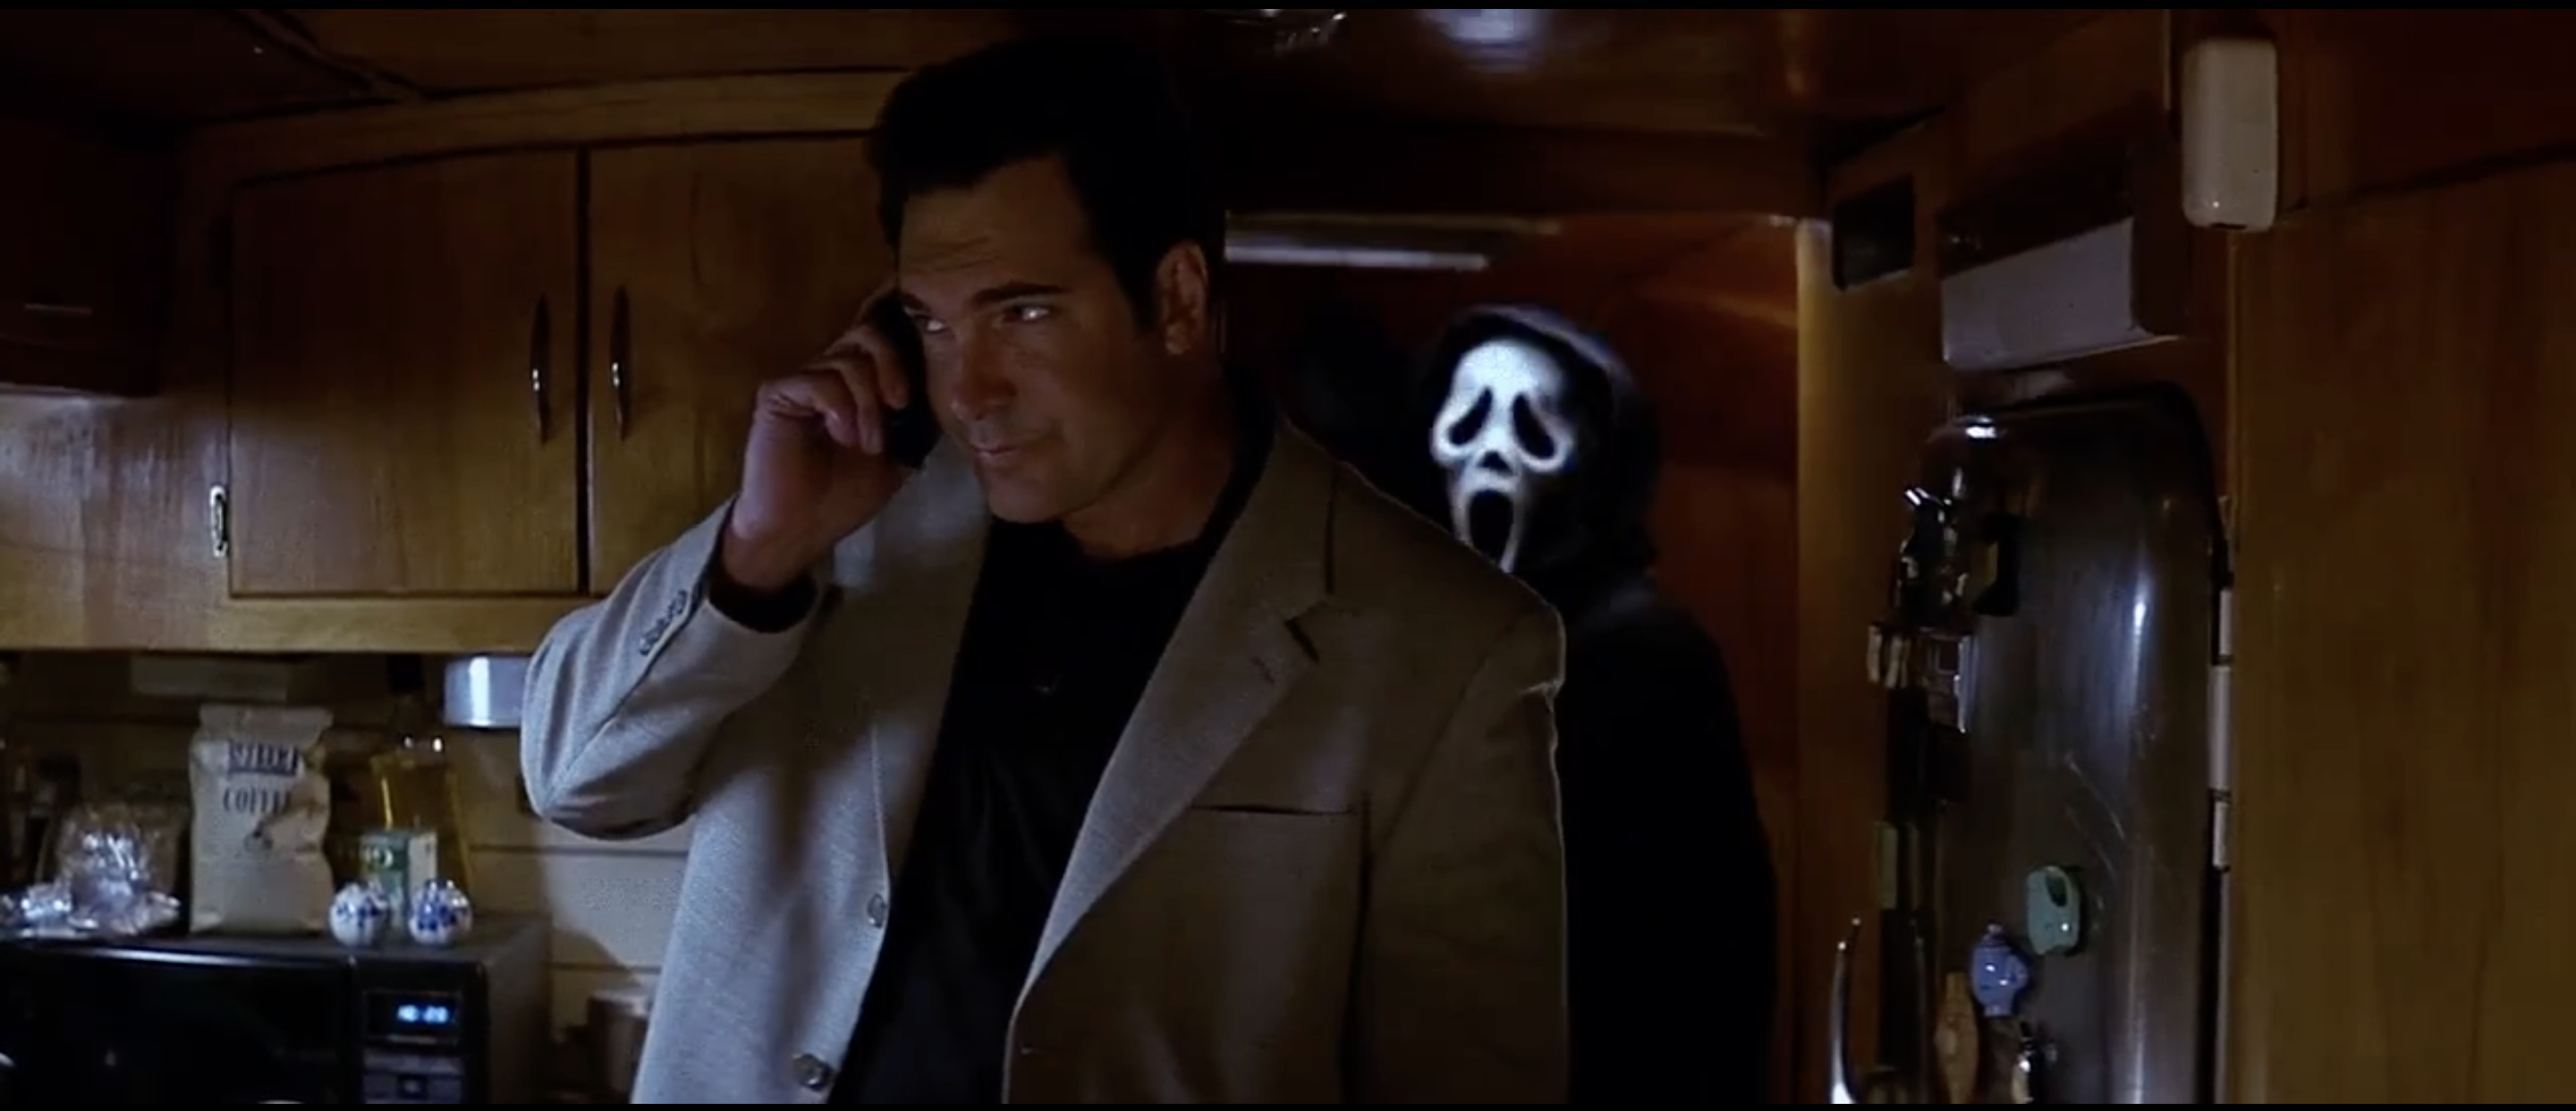 Patrick Warburton talks on the phone as Ghostface approaches him from behind